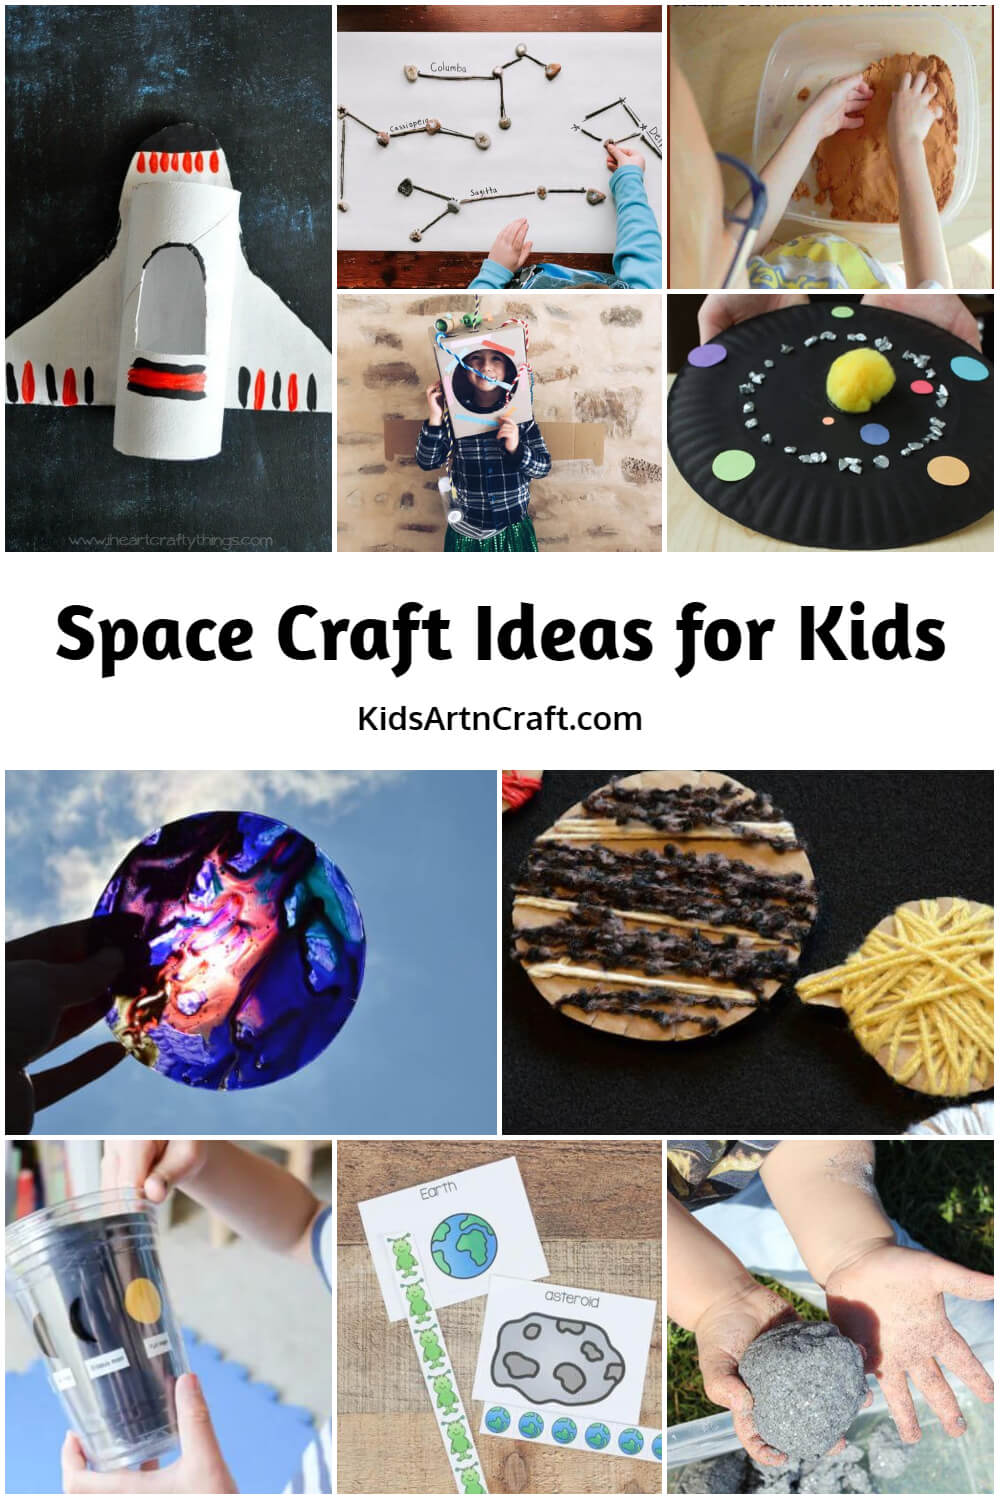  Space Craft Ideas for Kids